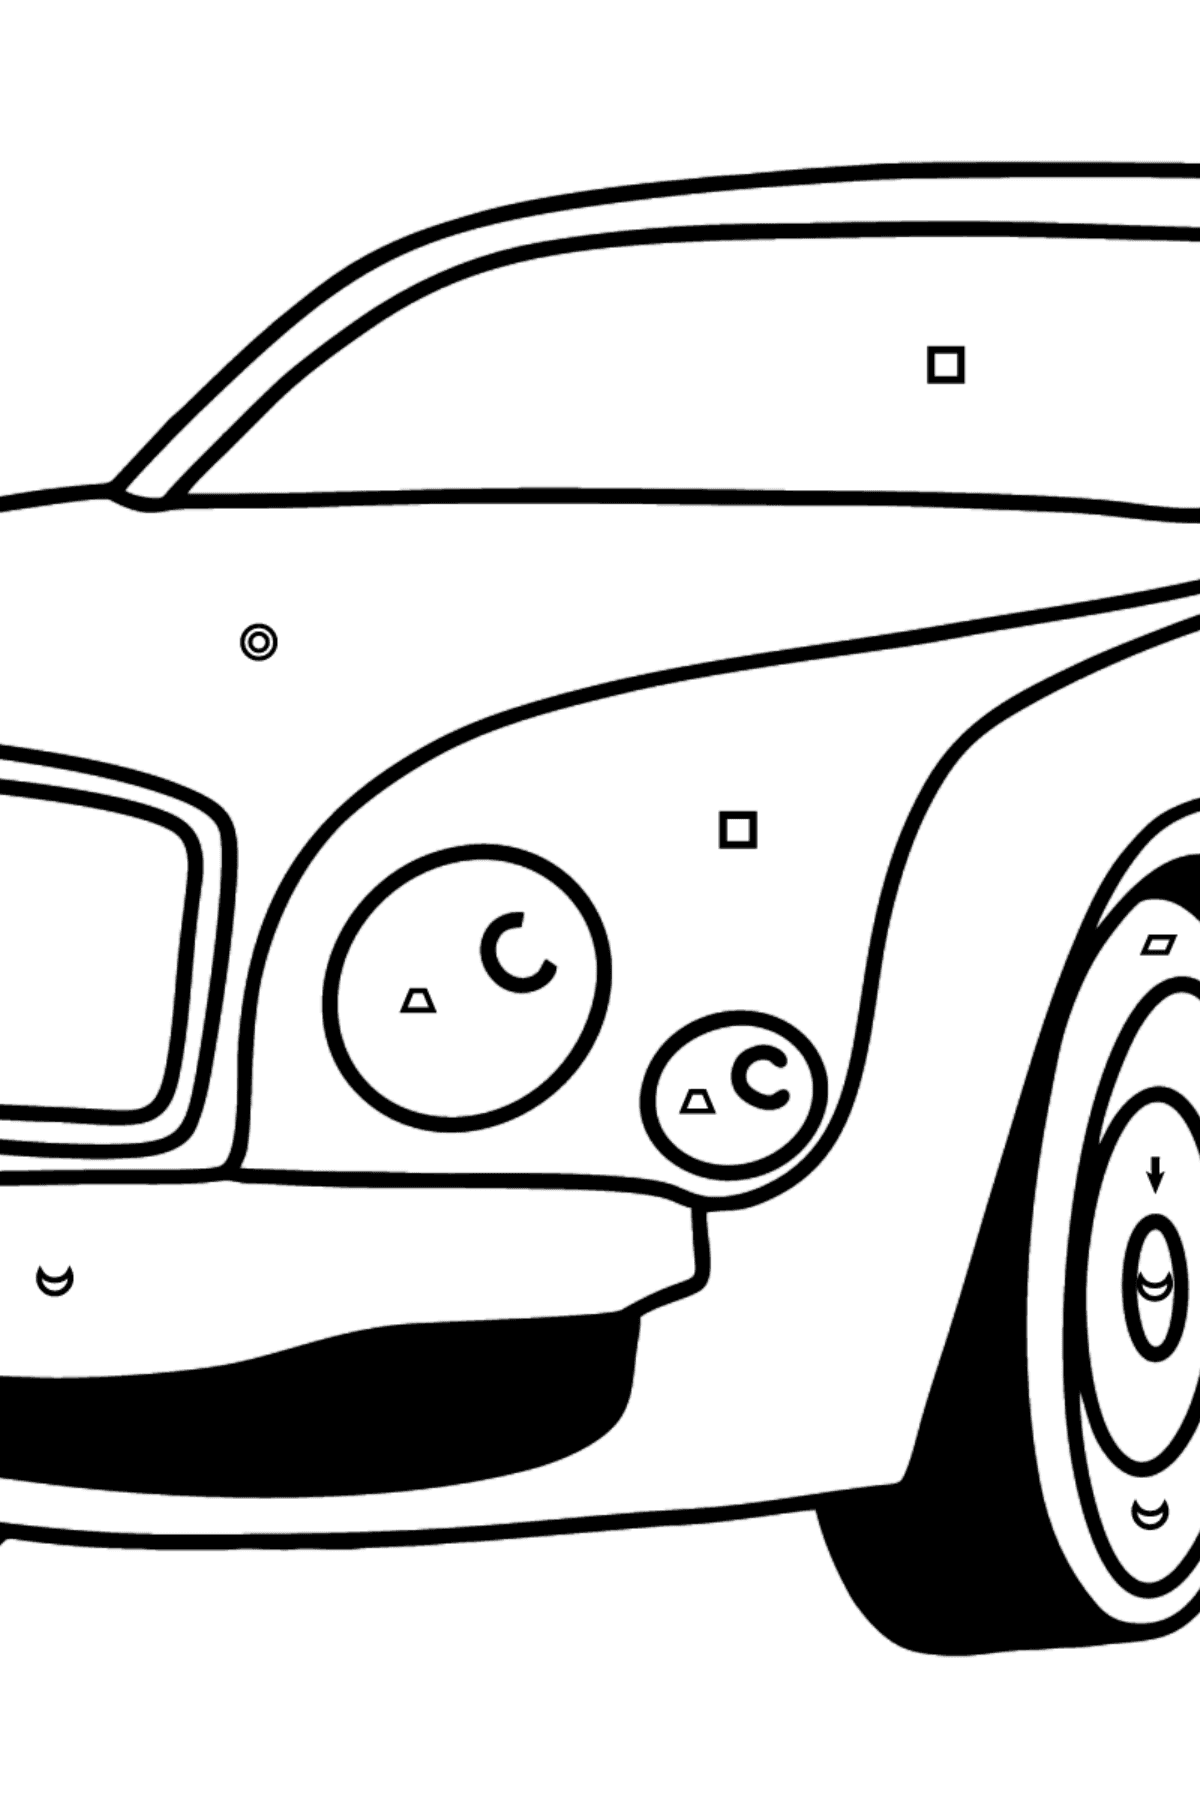 Bentley Car Coloring Page - Coloring by Symbols and Geometric Shapes for Kids